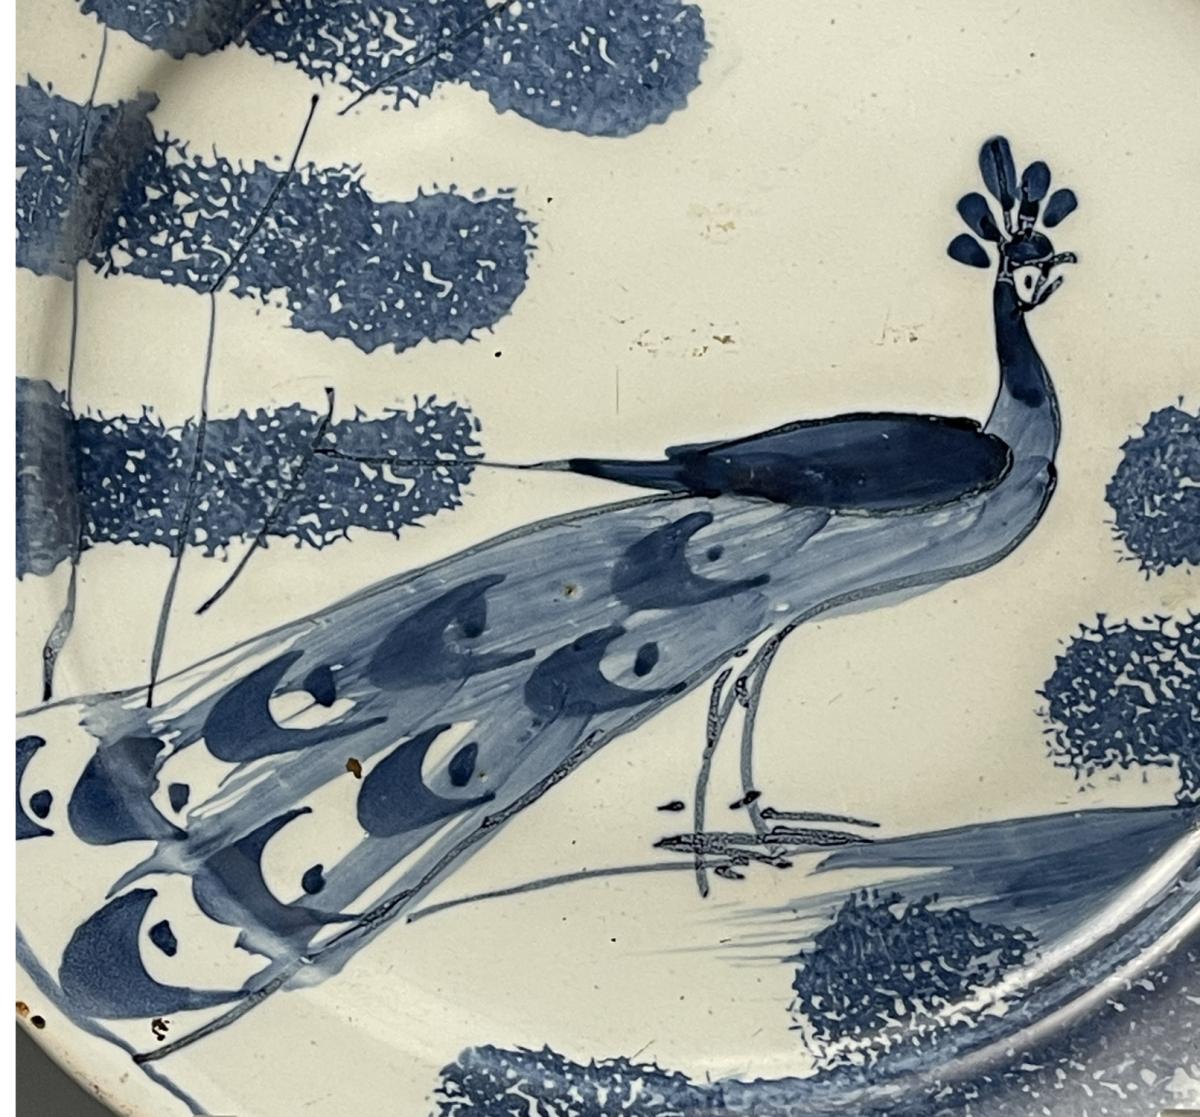 Bristol delftware blue and white plate with peacock and trees from the farmyard series mid 18th century